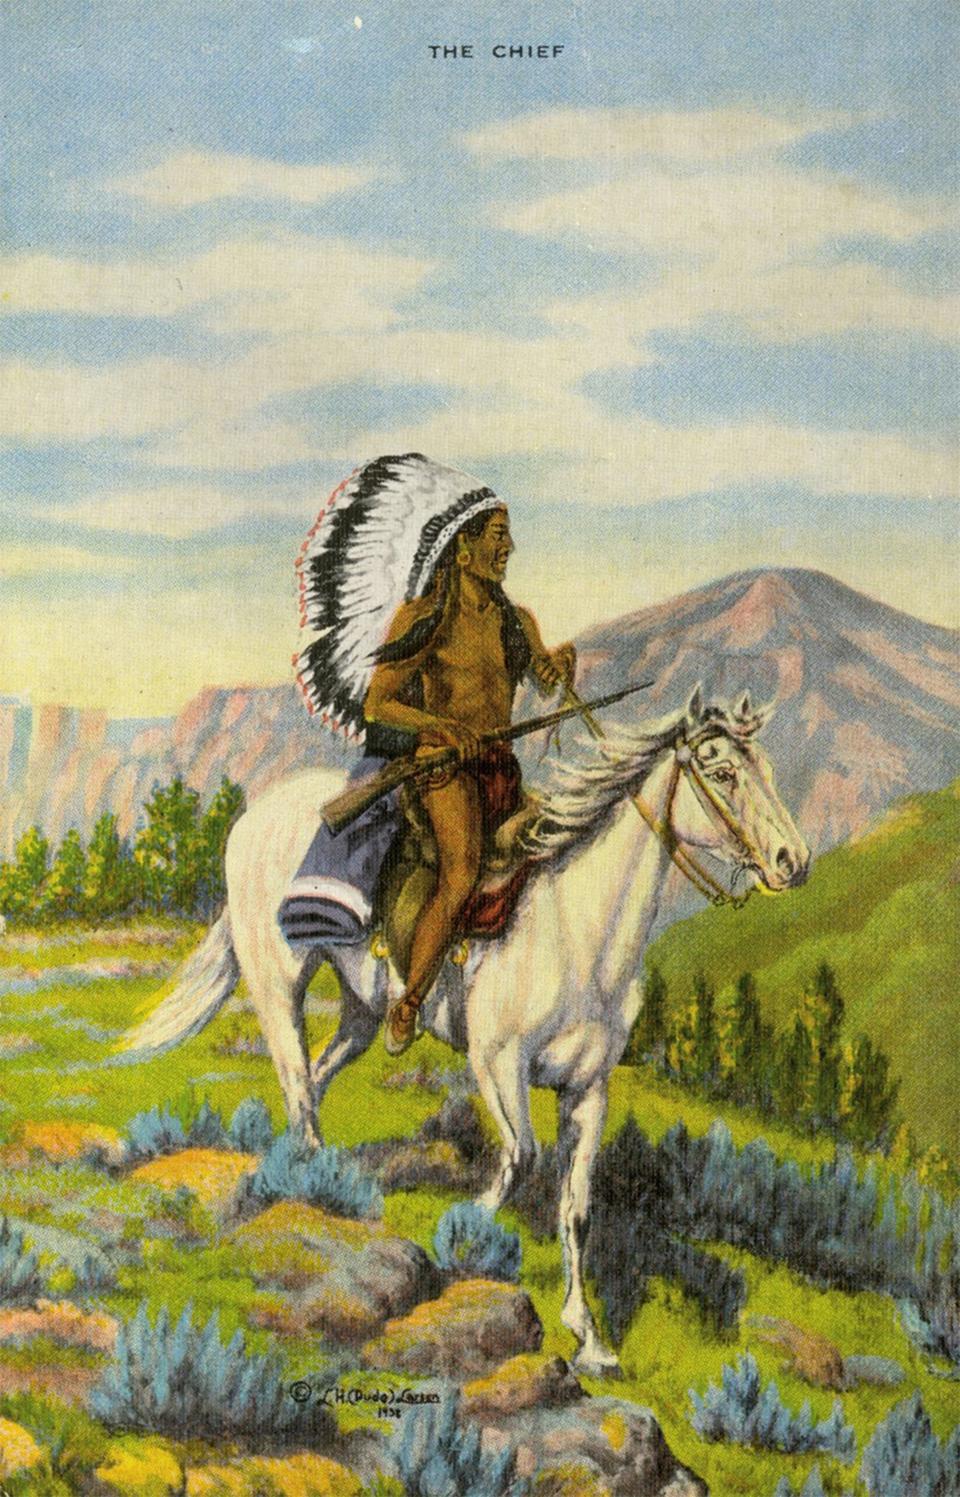 The 1938 image of the chief, above, is noble and nostalgic.